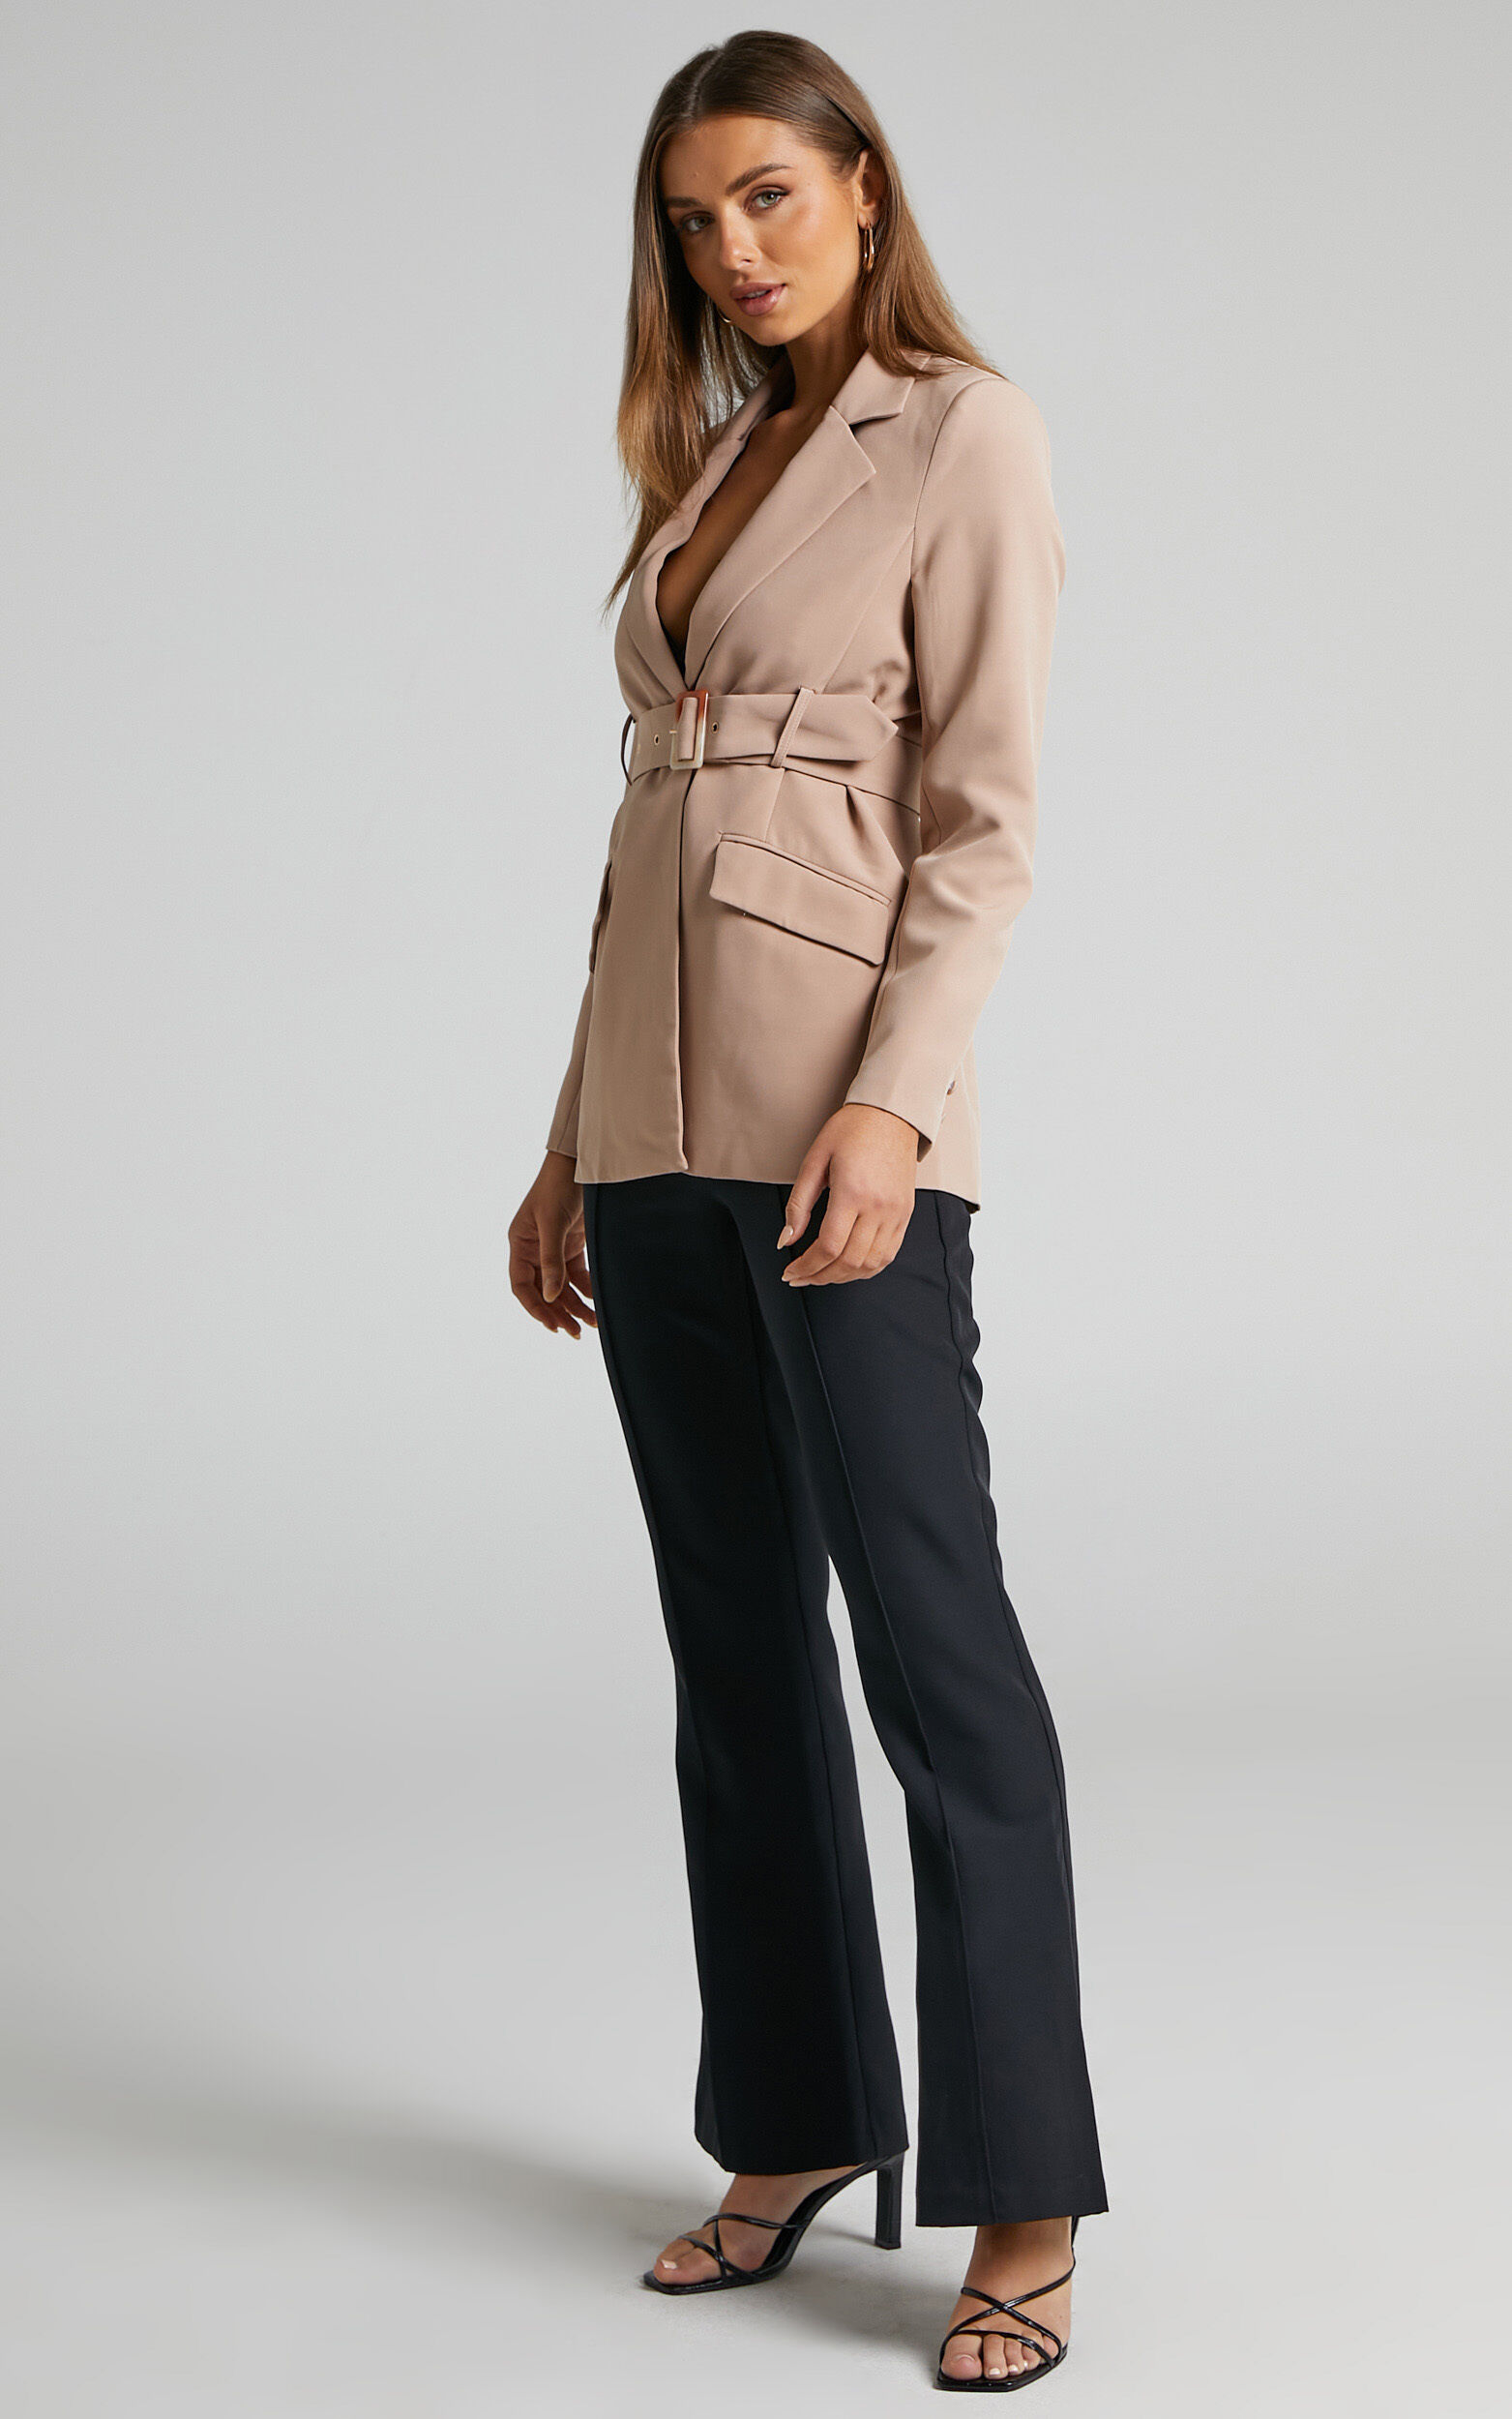 Mikirie Belted Cut Out Blazer in Tan - 08, BRN1, super-hi-res image number null